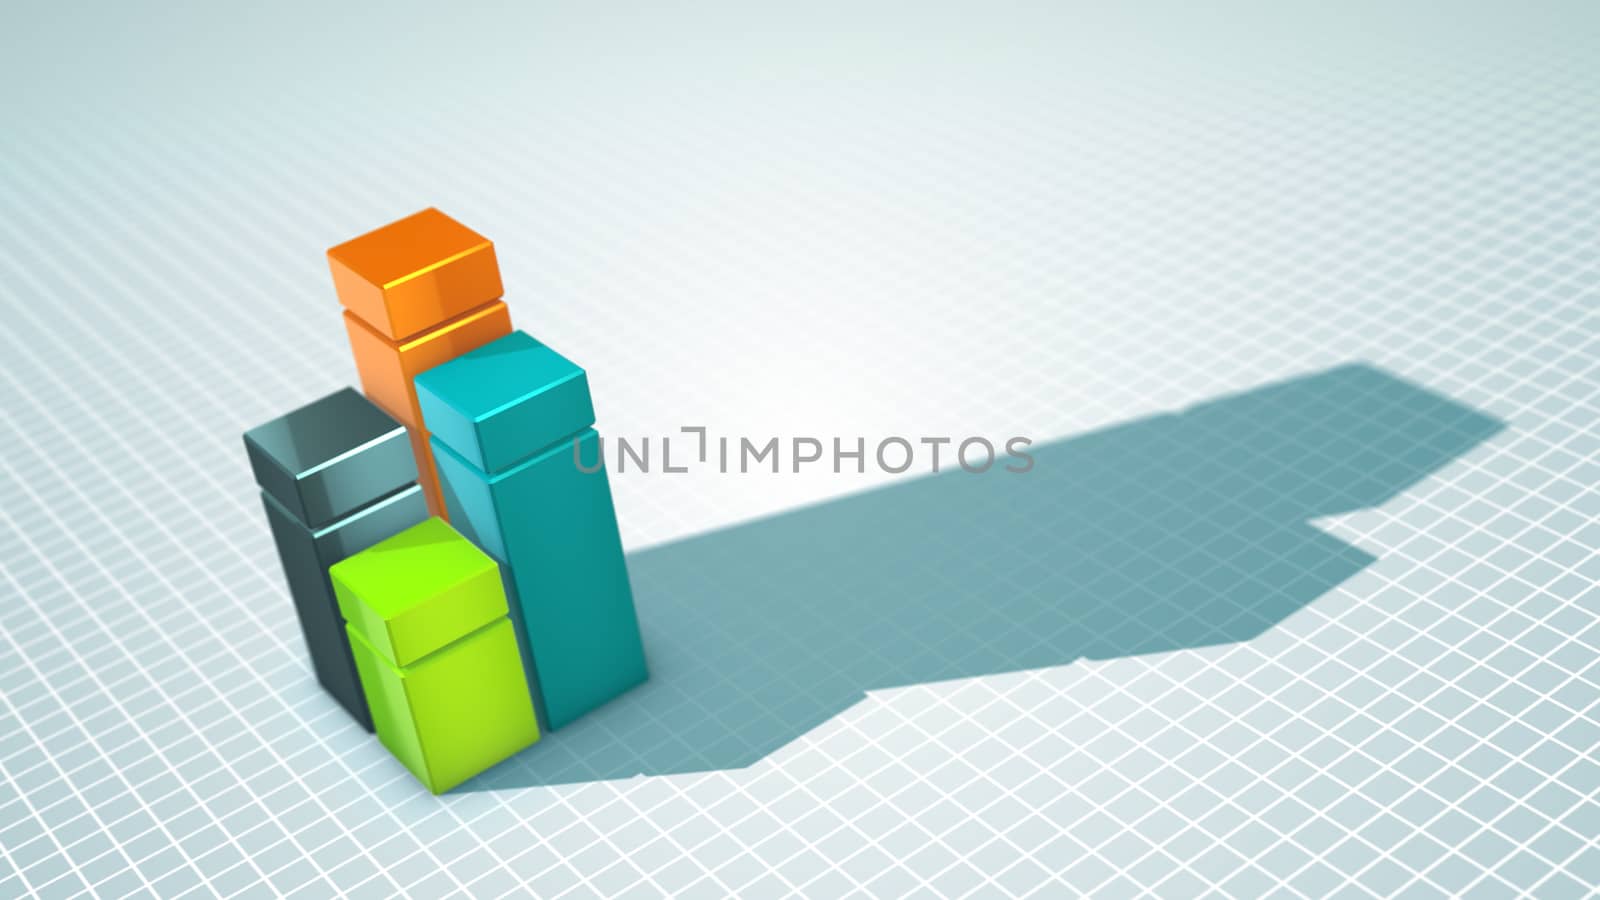 Striking 3d illustration of four cubic squares of golden, blue, green and black colors installed on a white surface with a meshwork. They have shadows and look optimistic as a daigram.